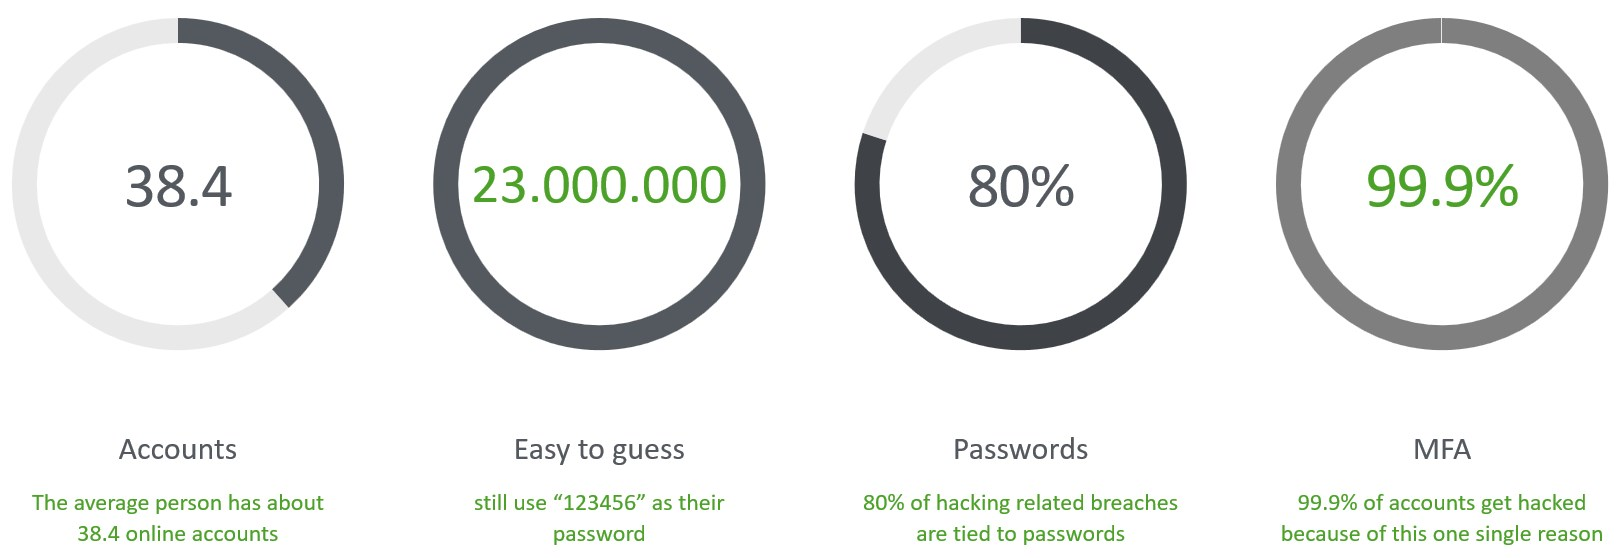 passwordless infographic about security numbers